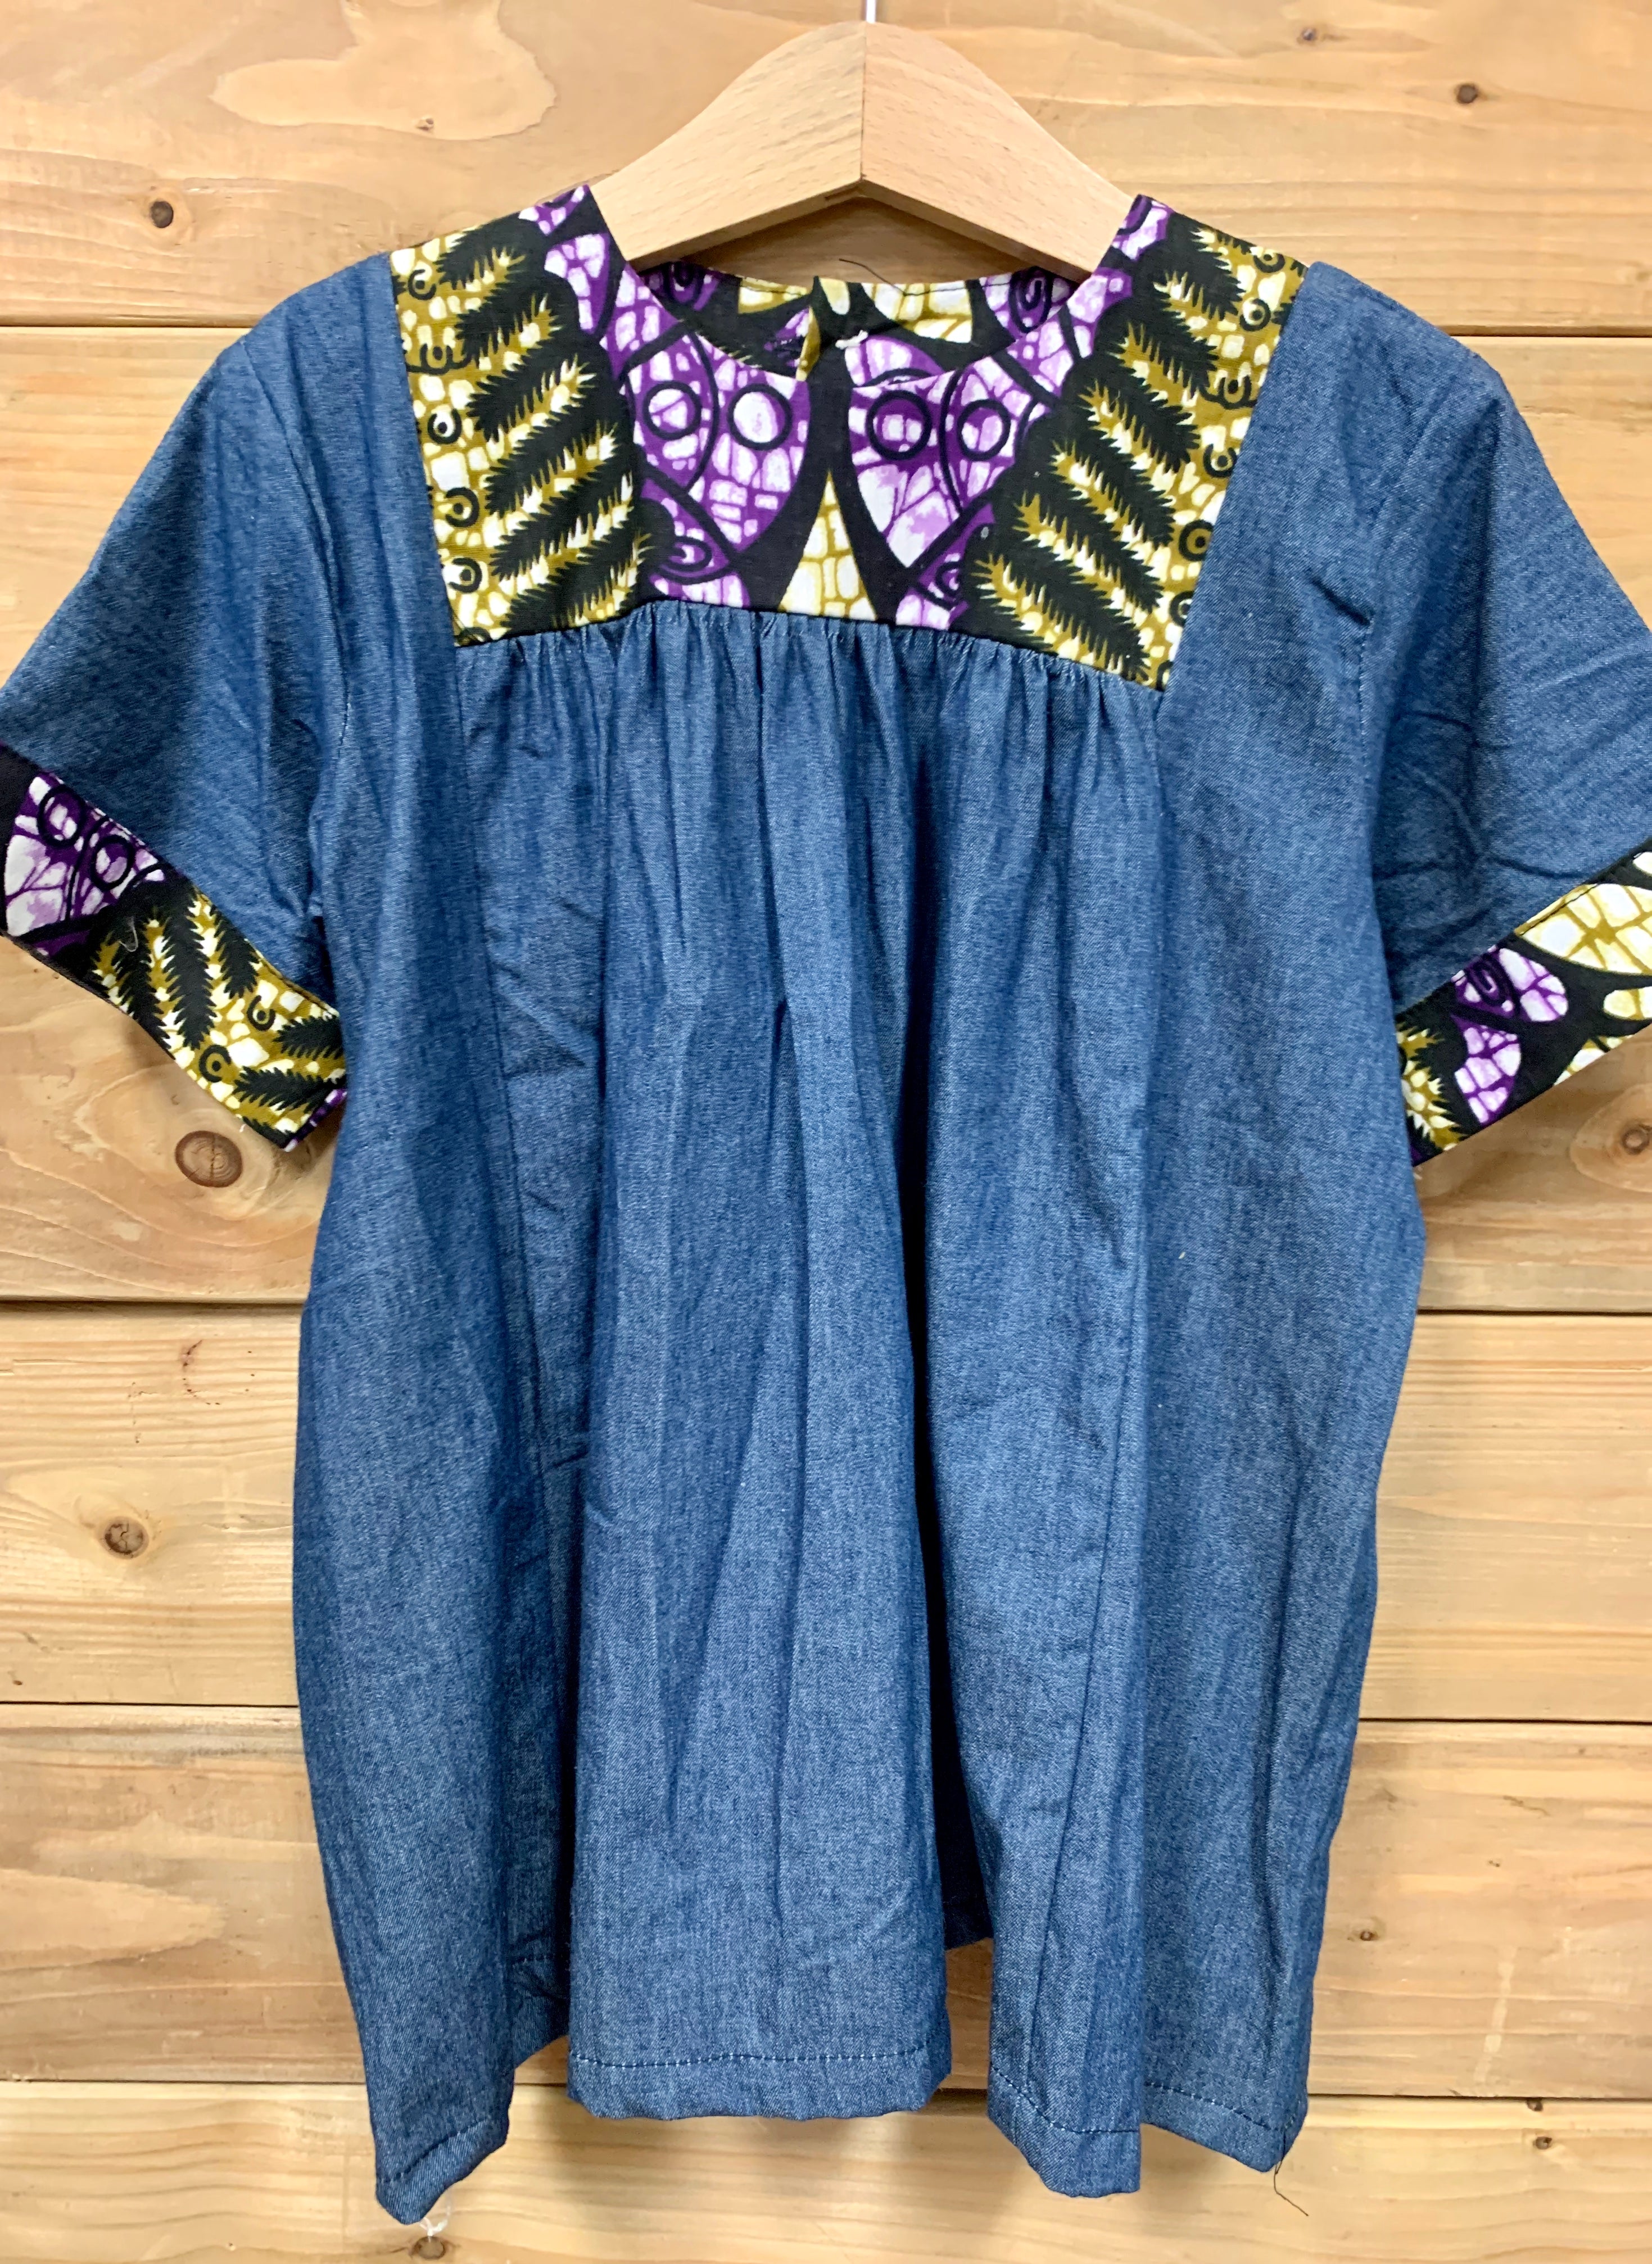 JustOne's small blue dress with design around the collar and cuffs of the sleeves, hand-sewn in Uganda